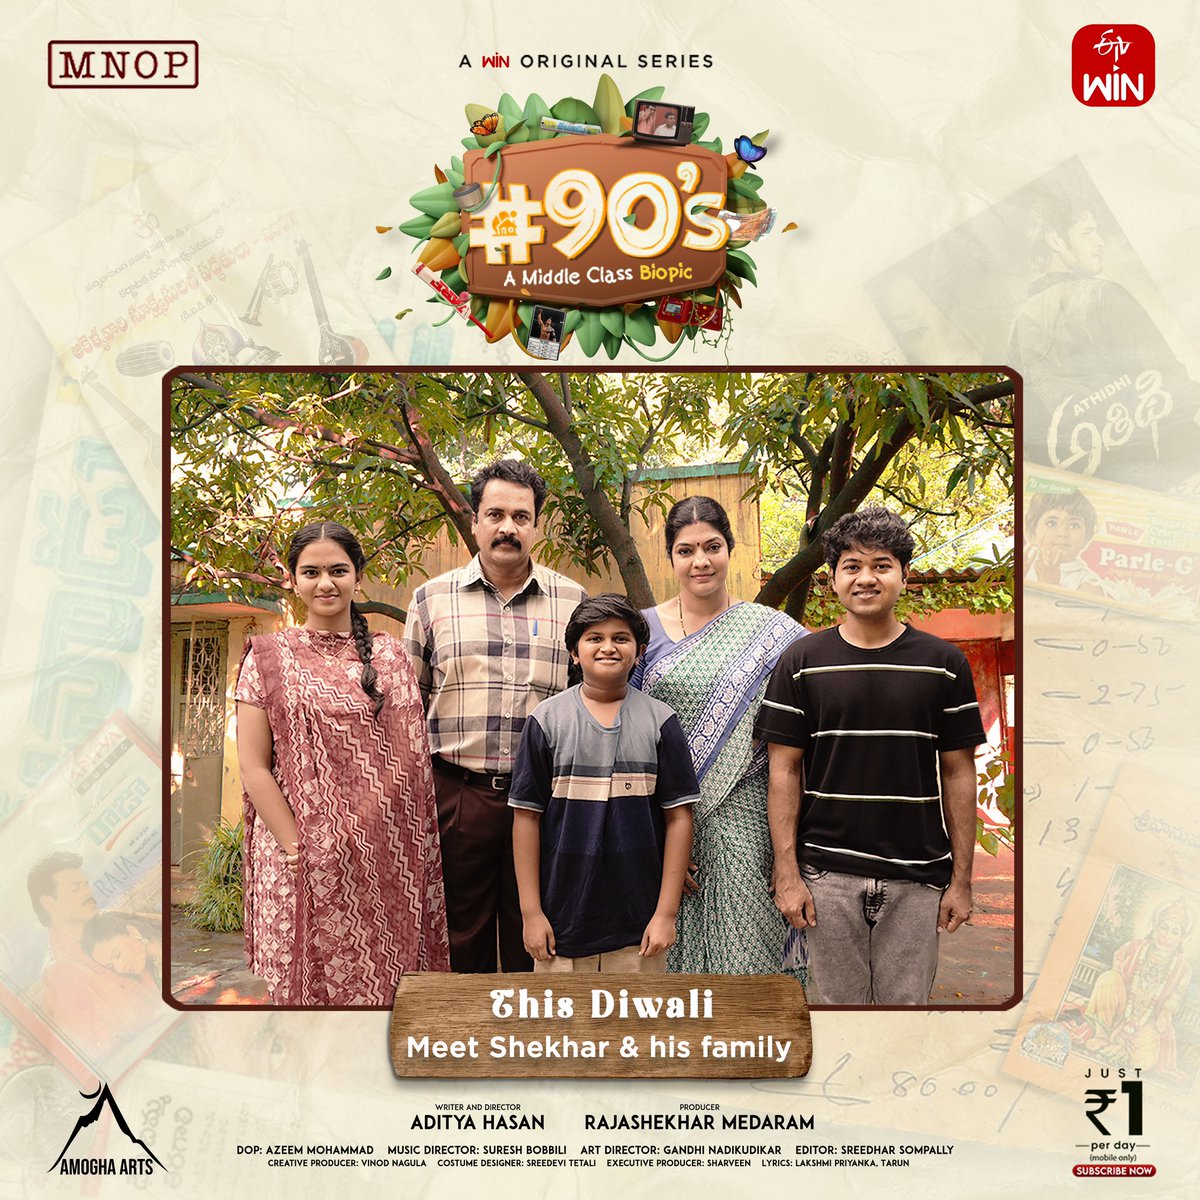 Meet The Shekhars in #90’s - A Middle Class Biopic A journey that is filled with memories, challenges, and the unbreakable bond of a middle-class family. This Diwali, invite Shekhar and his loved ones into your homes and hearts